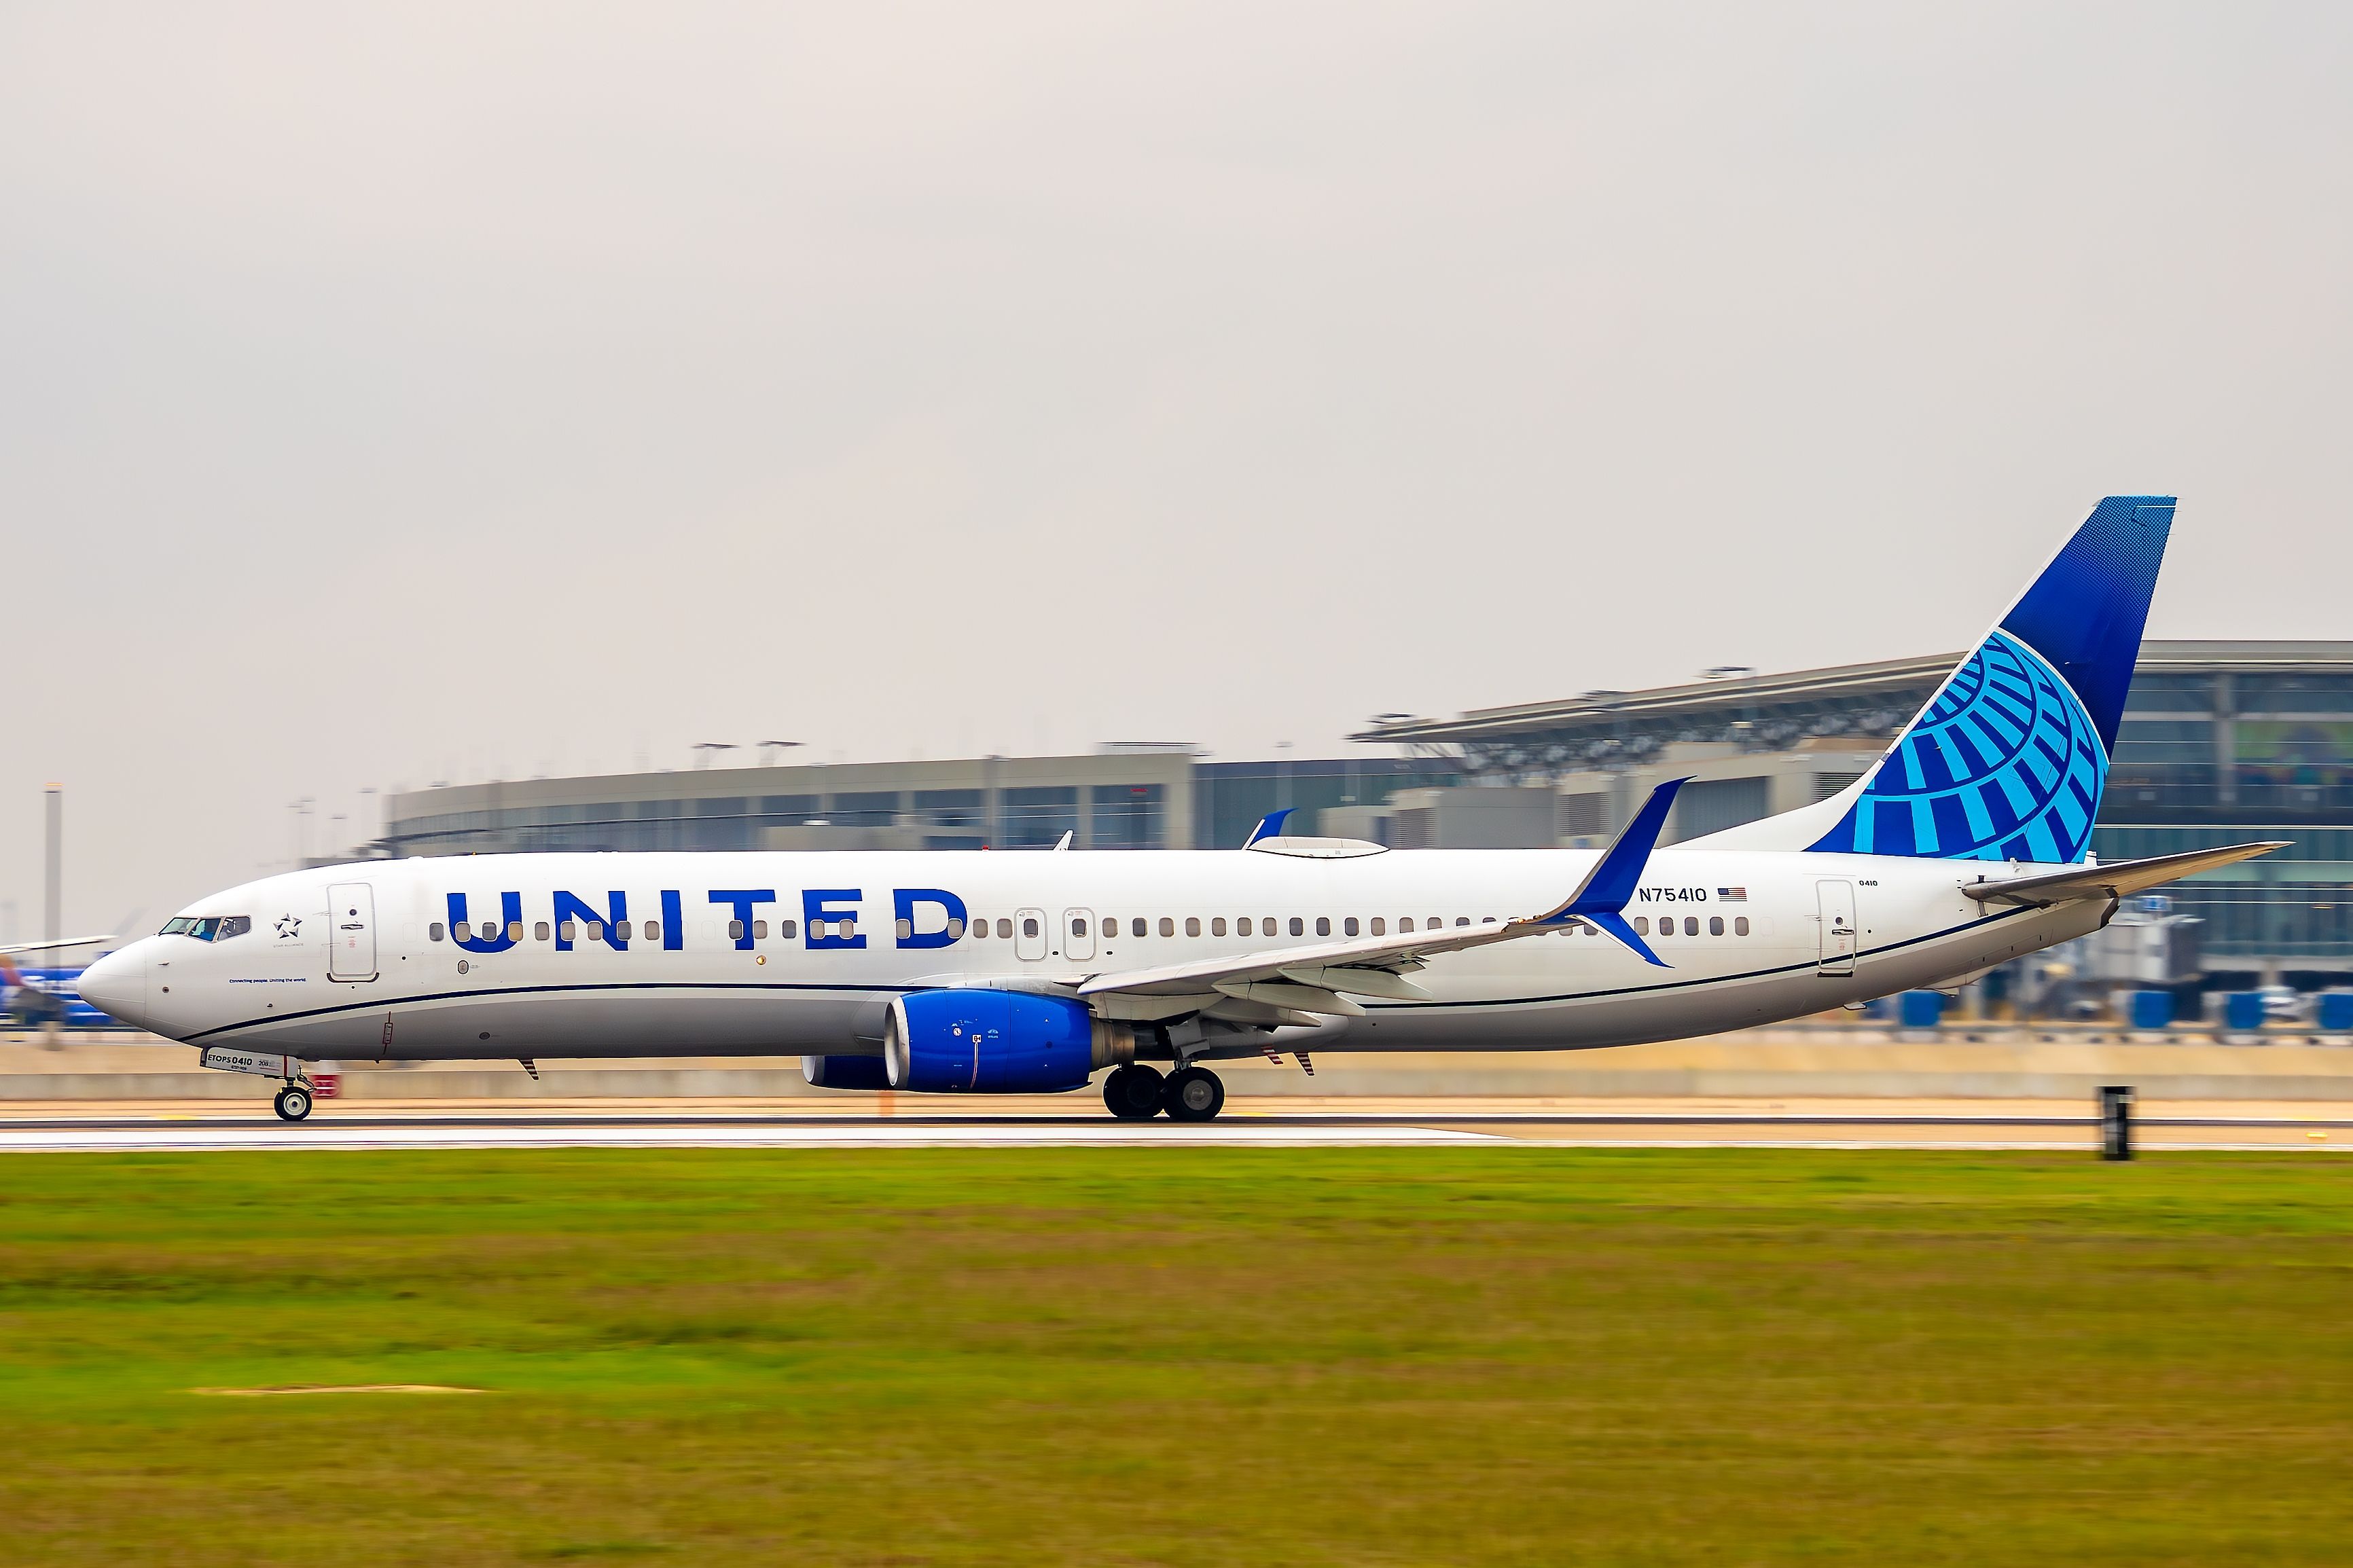 A United Airlines Boeing 737-900 on an airport apron.